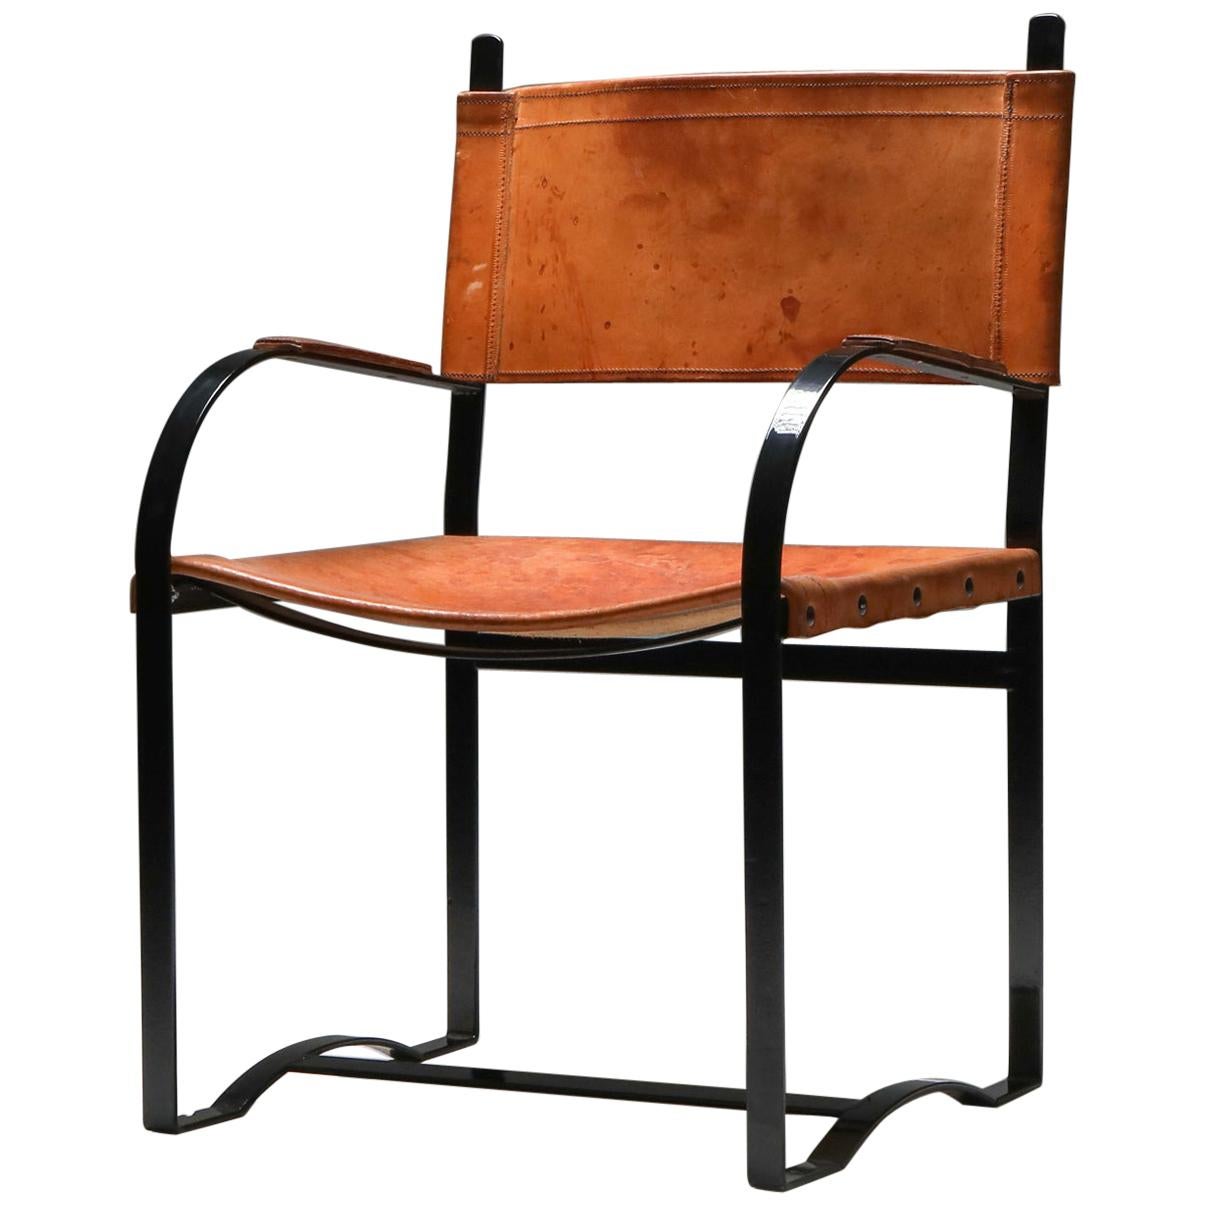 Rustic Modern Cognac Leather Chair For Sale